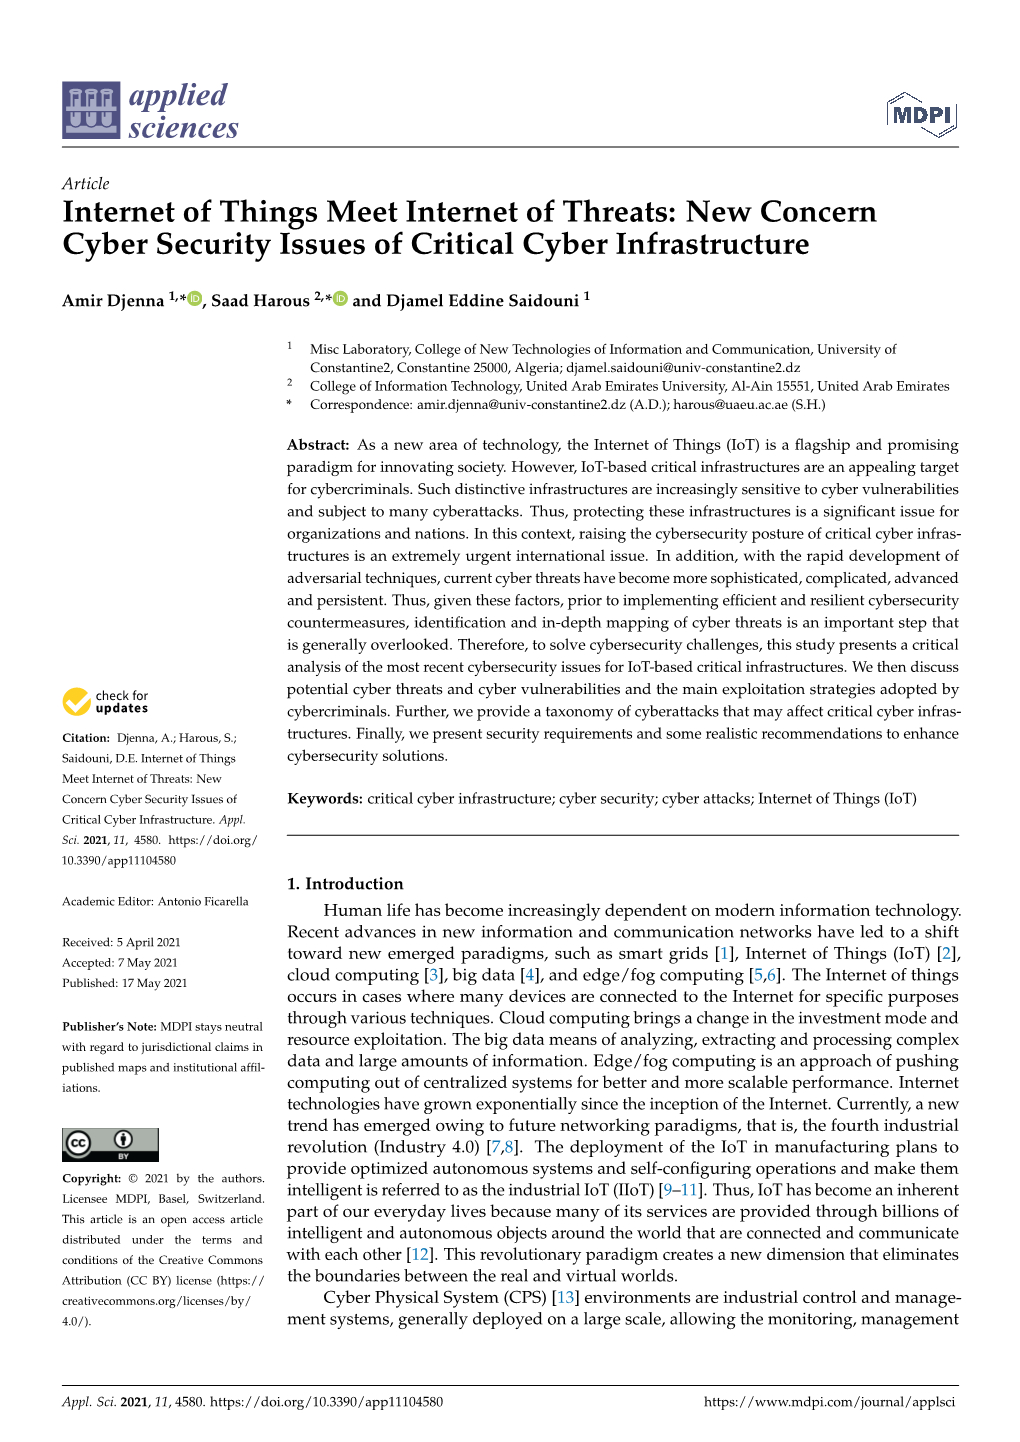 New Concern Cyber Security Issues of Critical Cyber Infrastructure